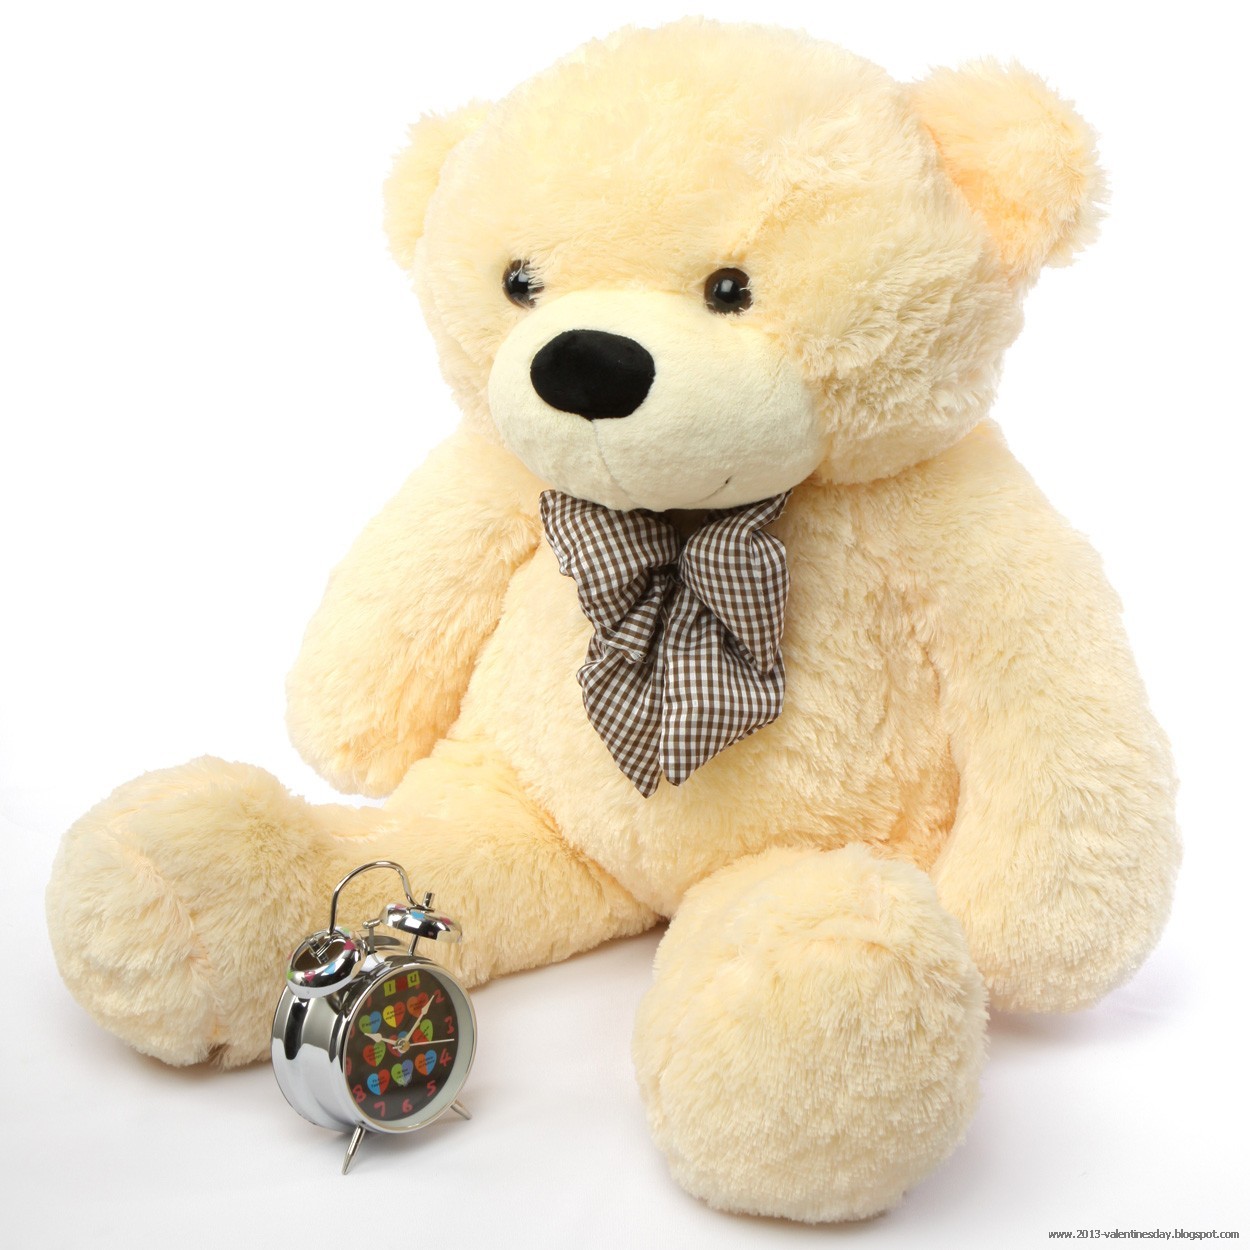 Valentines day Teddy bear gift ideas n HD wallpapers 1250x1250